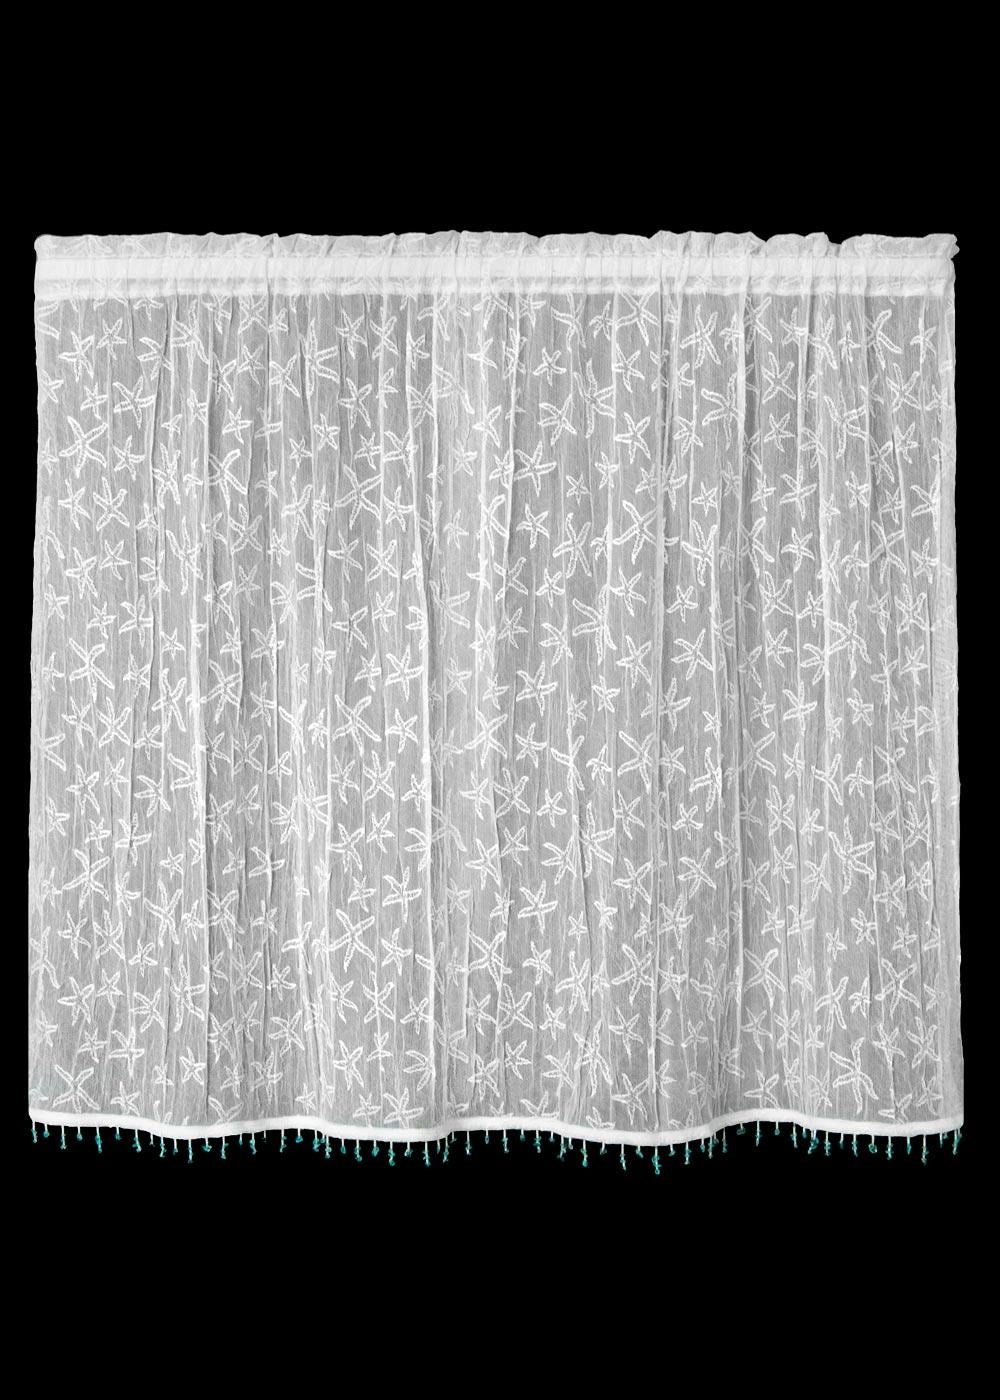 Heritage Lace  - Starfish Collection - Curtains, Runners, Shower Curtain, Material, etc